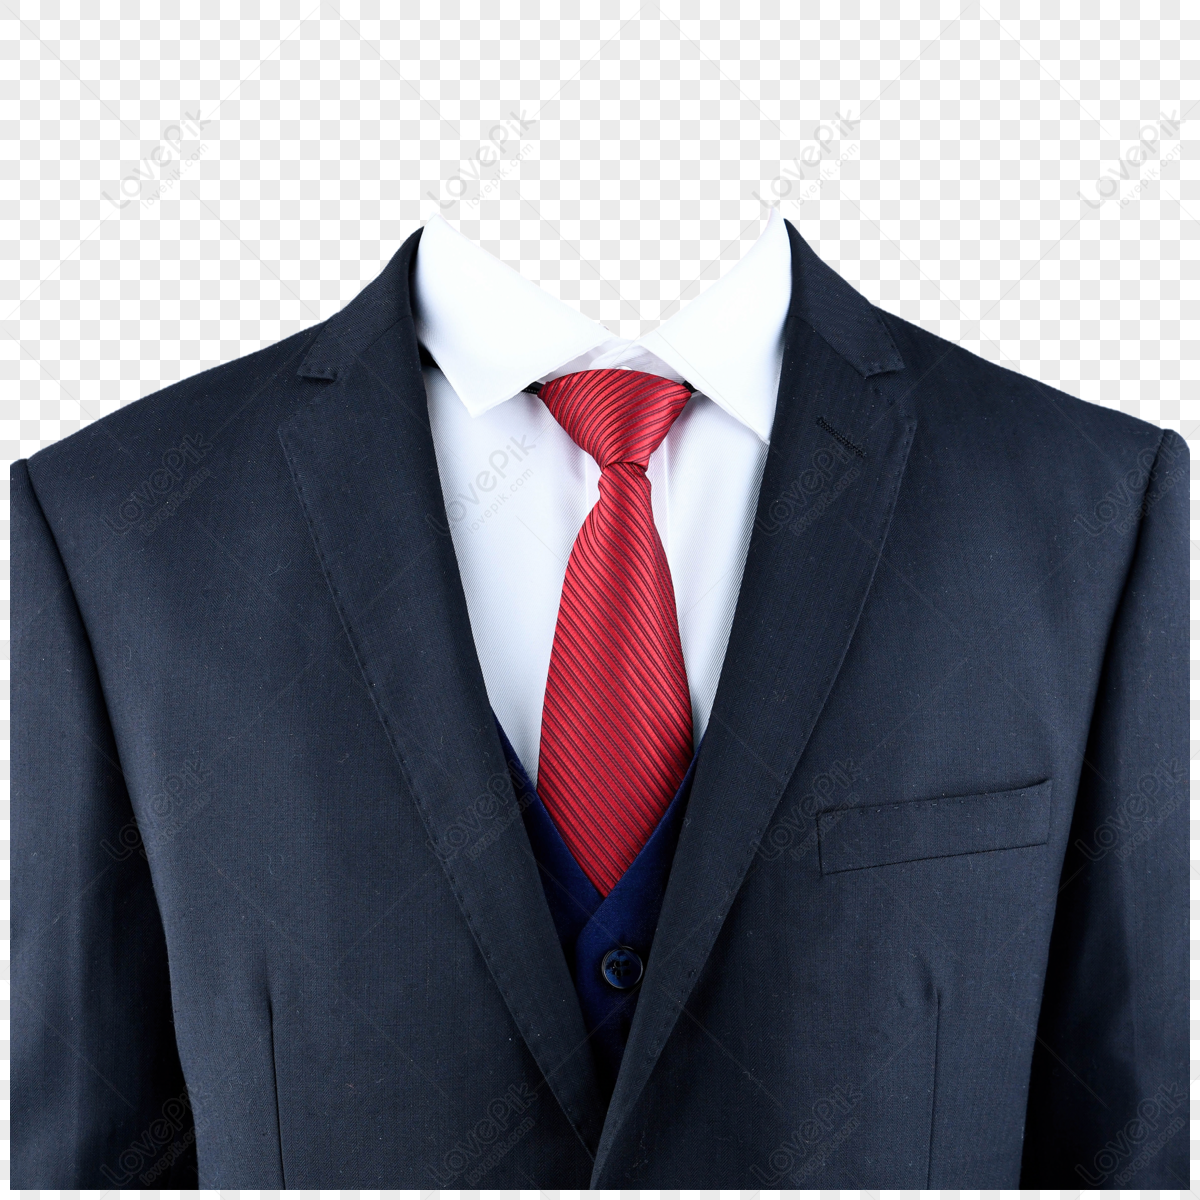 Bustphoto Photography Illustration Red Tie White Shirt Black Suit ...